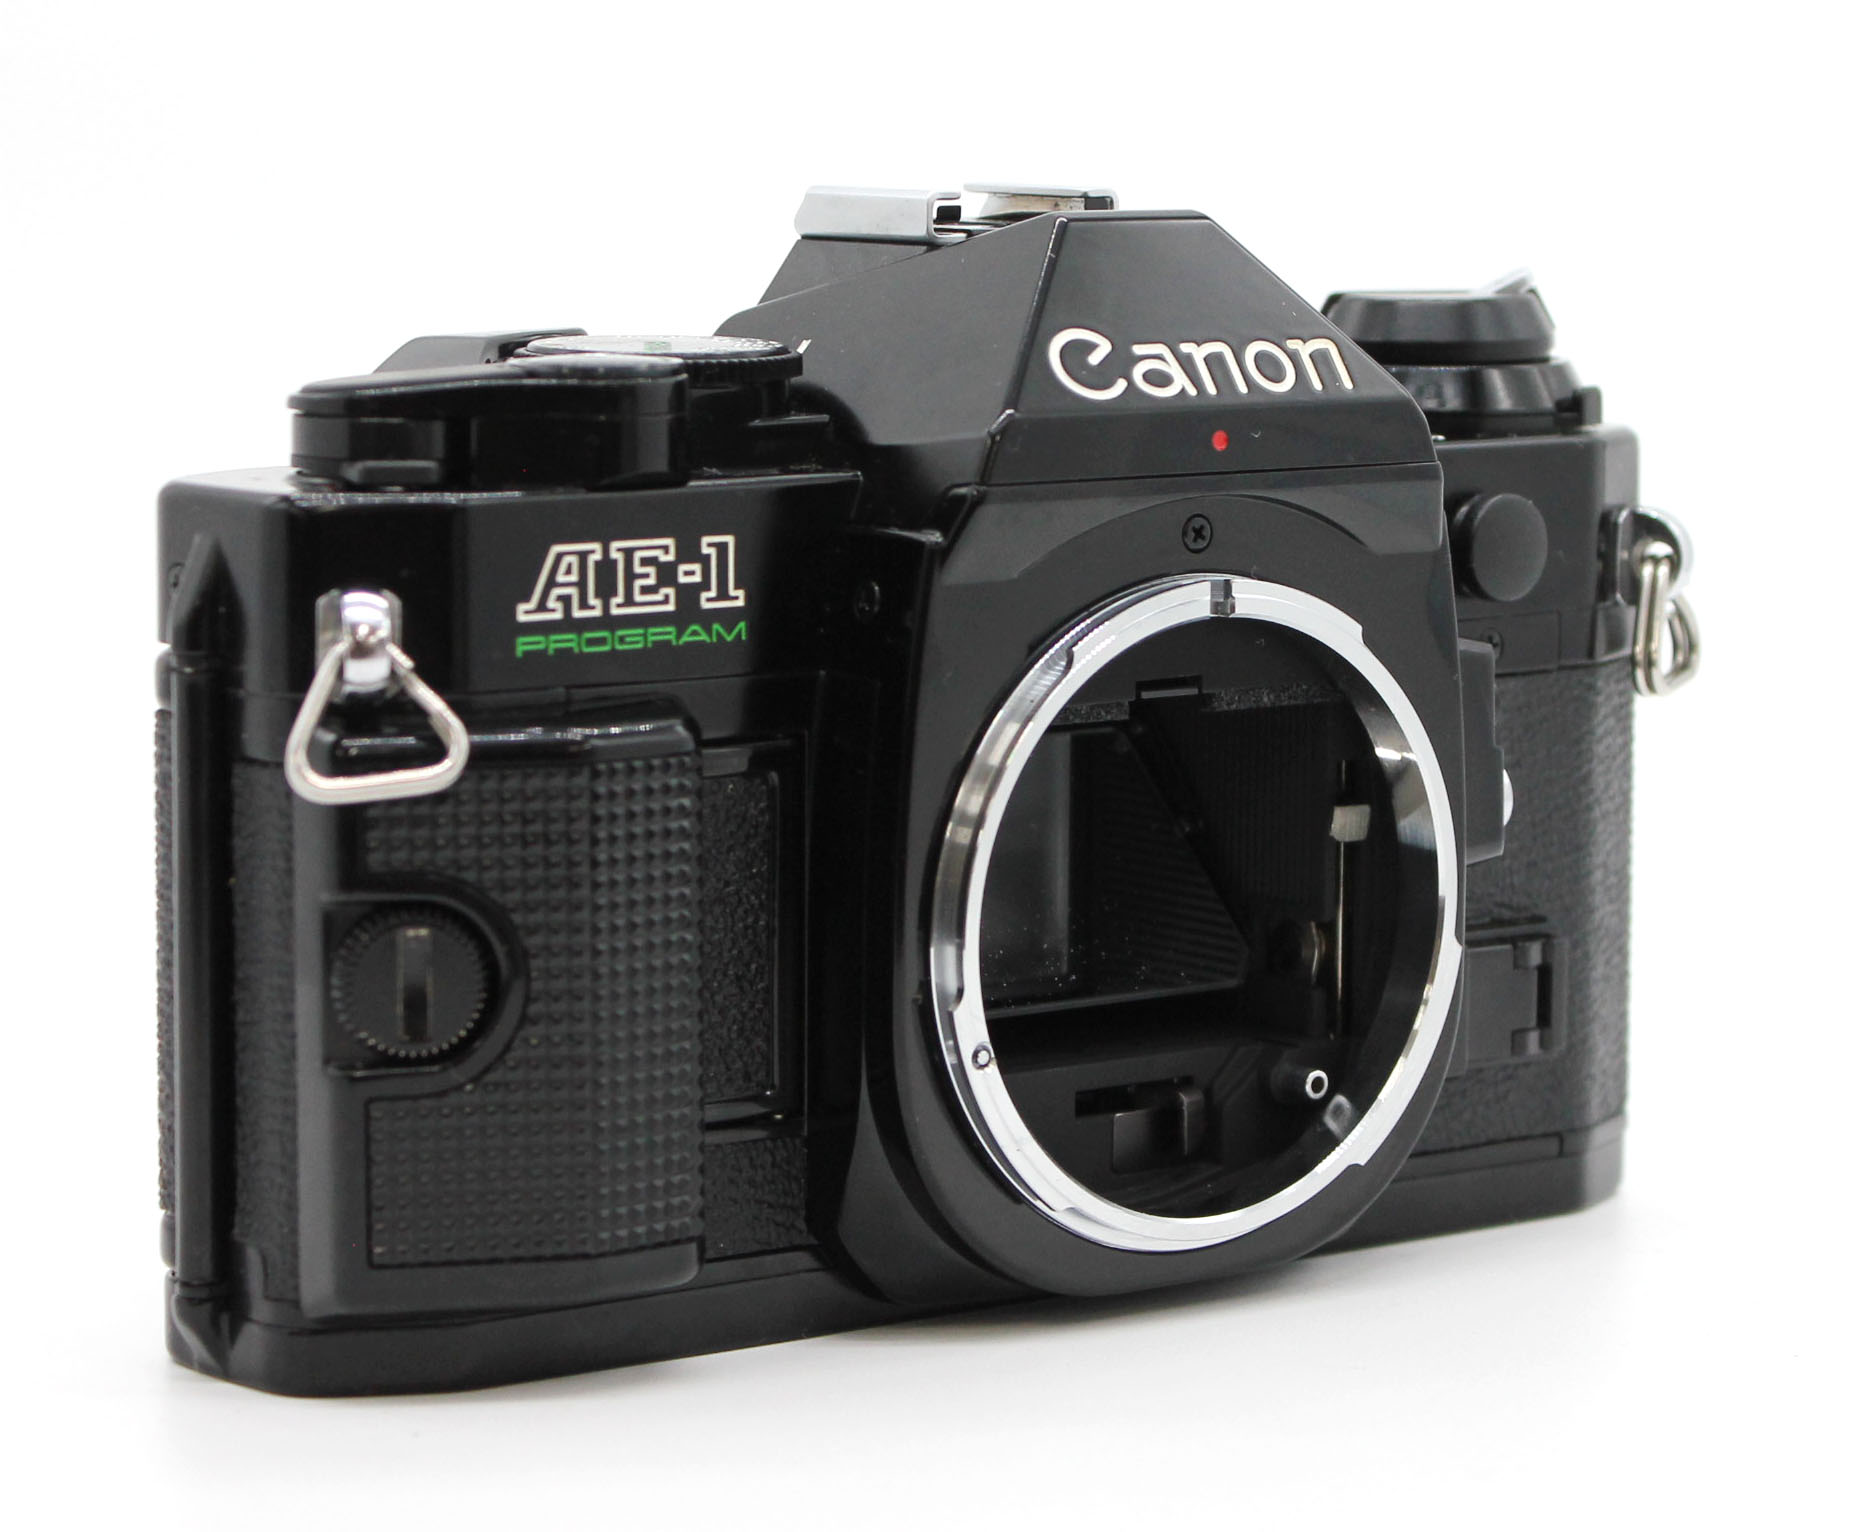 Canon AE-1 Program 35mm SLR Film Camera Black with New FD 50mm F/1.4 Lens from Japan Photo 2